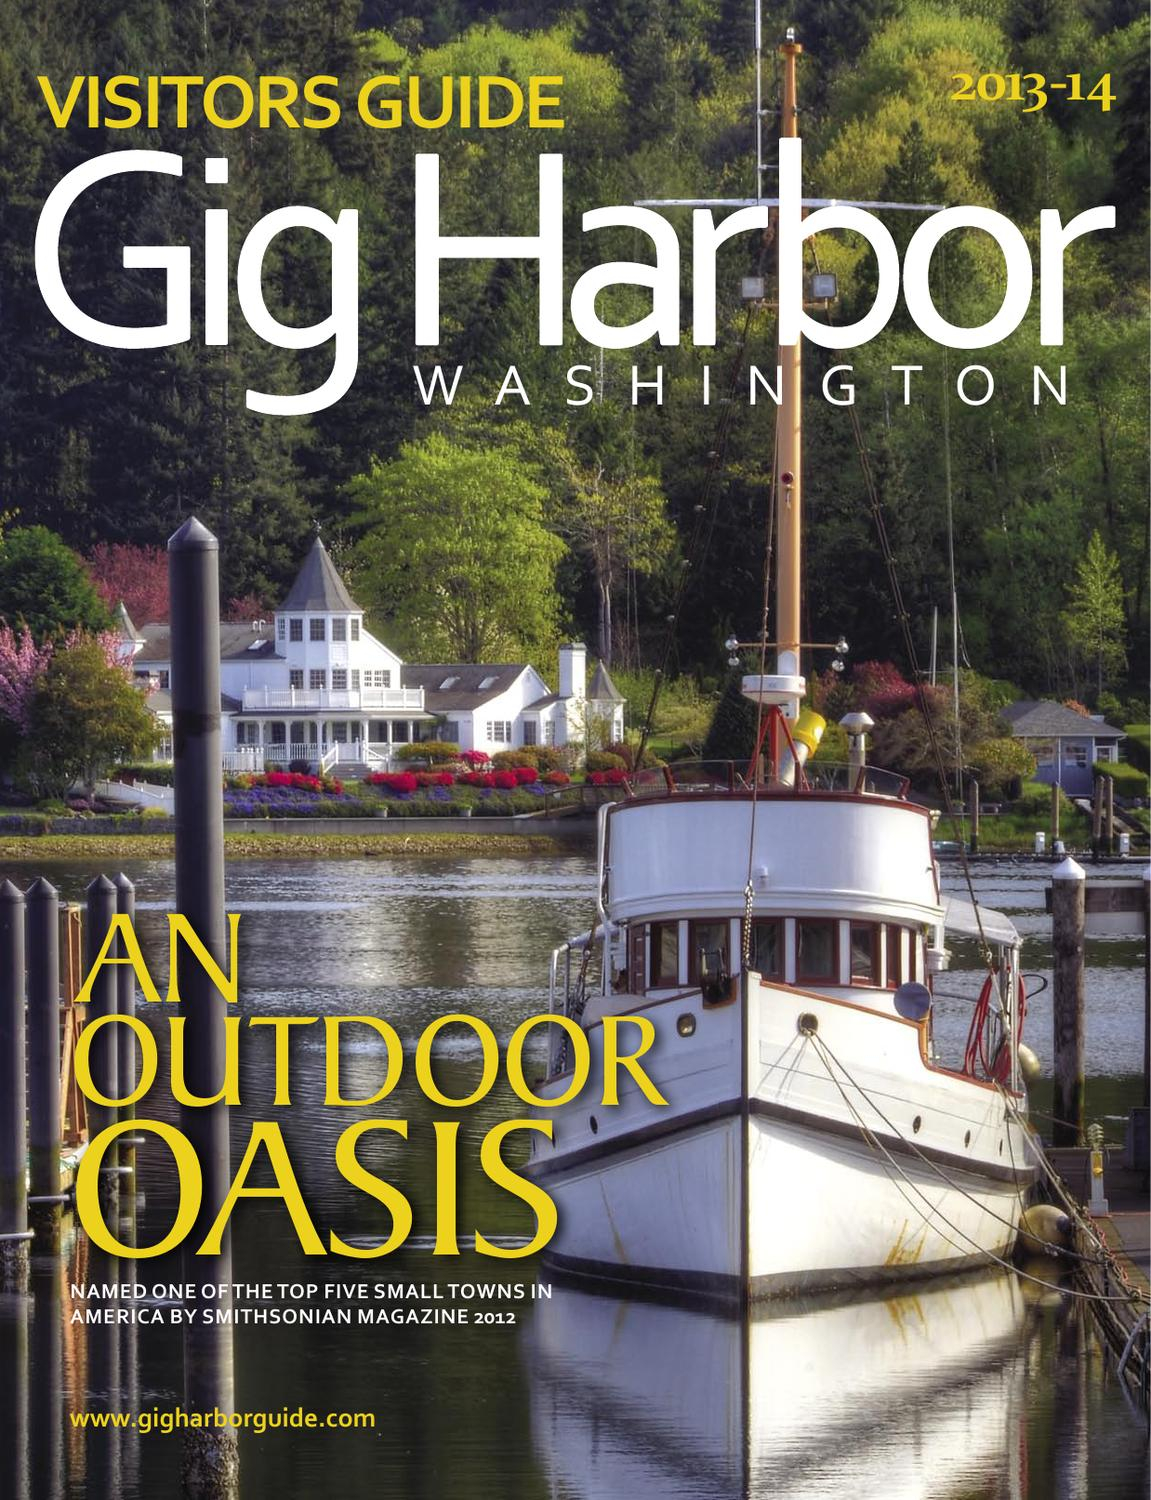 Gig Harbor Visitors Guide 2013 Jim Appelgate Issuu within sizing 1151 X 1500